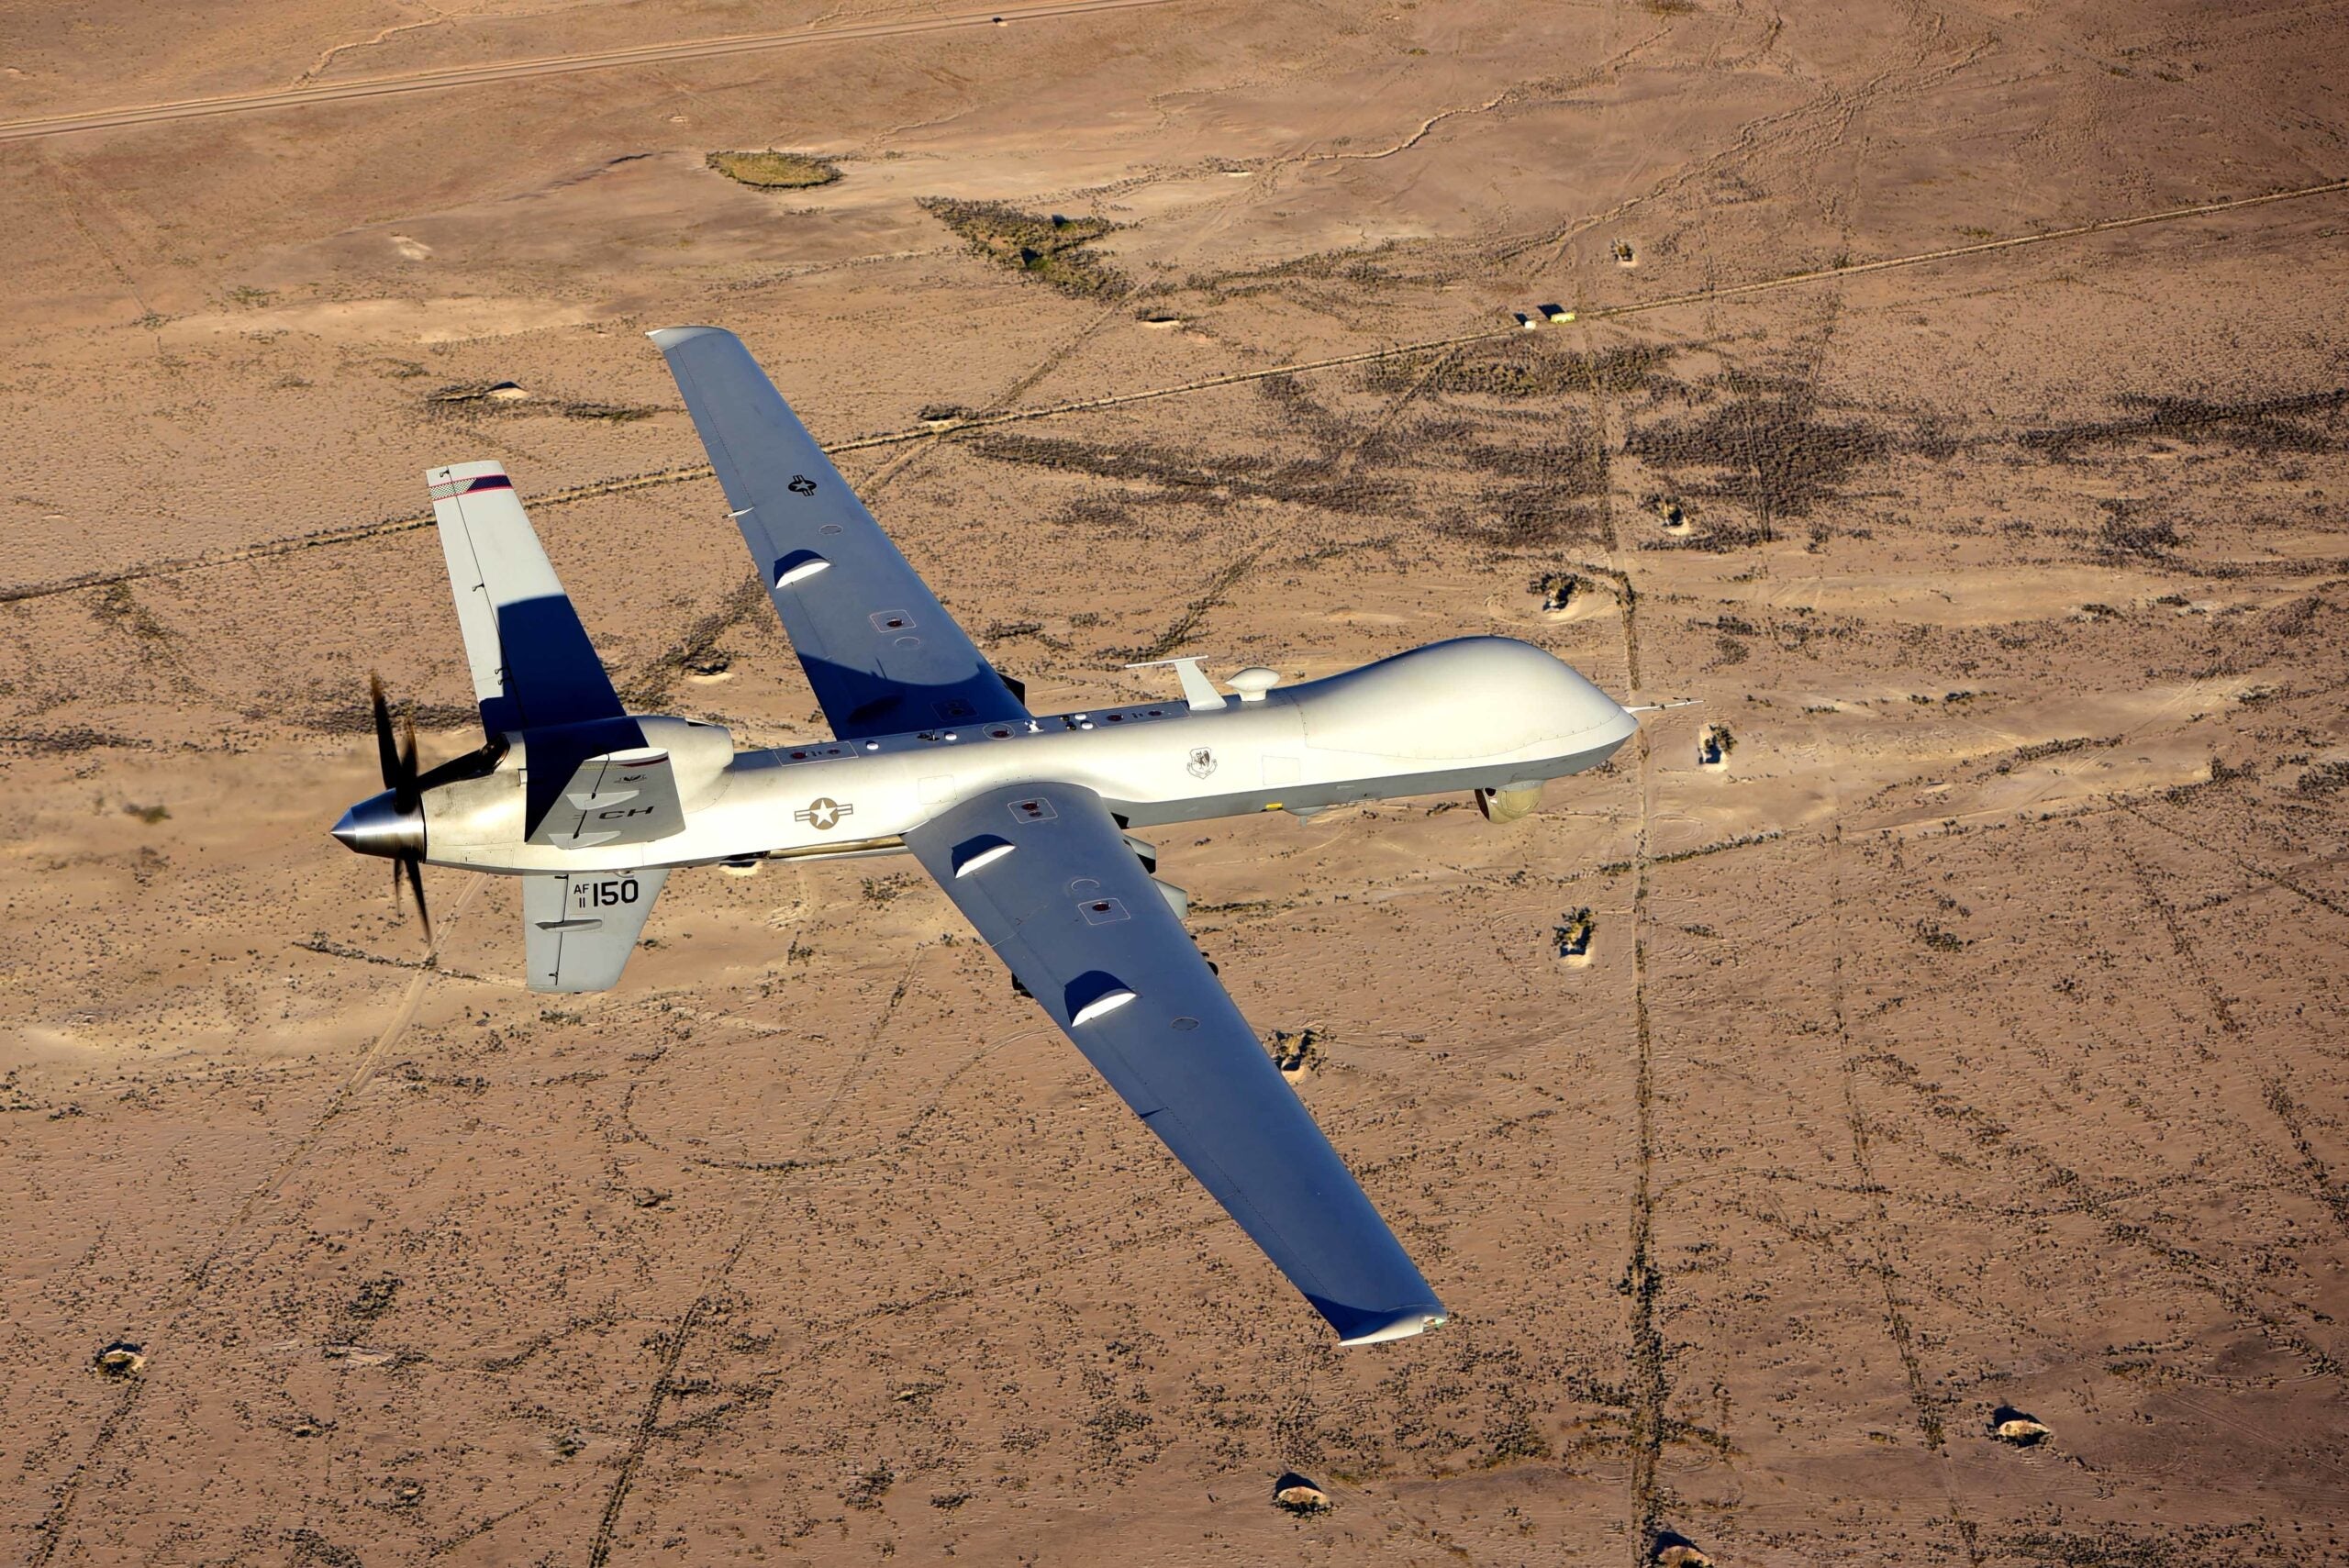 An MQ-9 Reaper flies a training mission over the Nevada Test and Training Range, July 15, 2019. MQ-9 aircrew provide dominant, persistent attack and reconnaissance for comabtant commanders and coalition partners across the globe. (U.S. Air Force photo by Airman 1st Class William Rio Rosado)